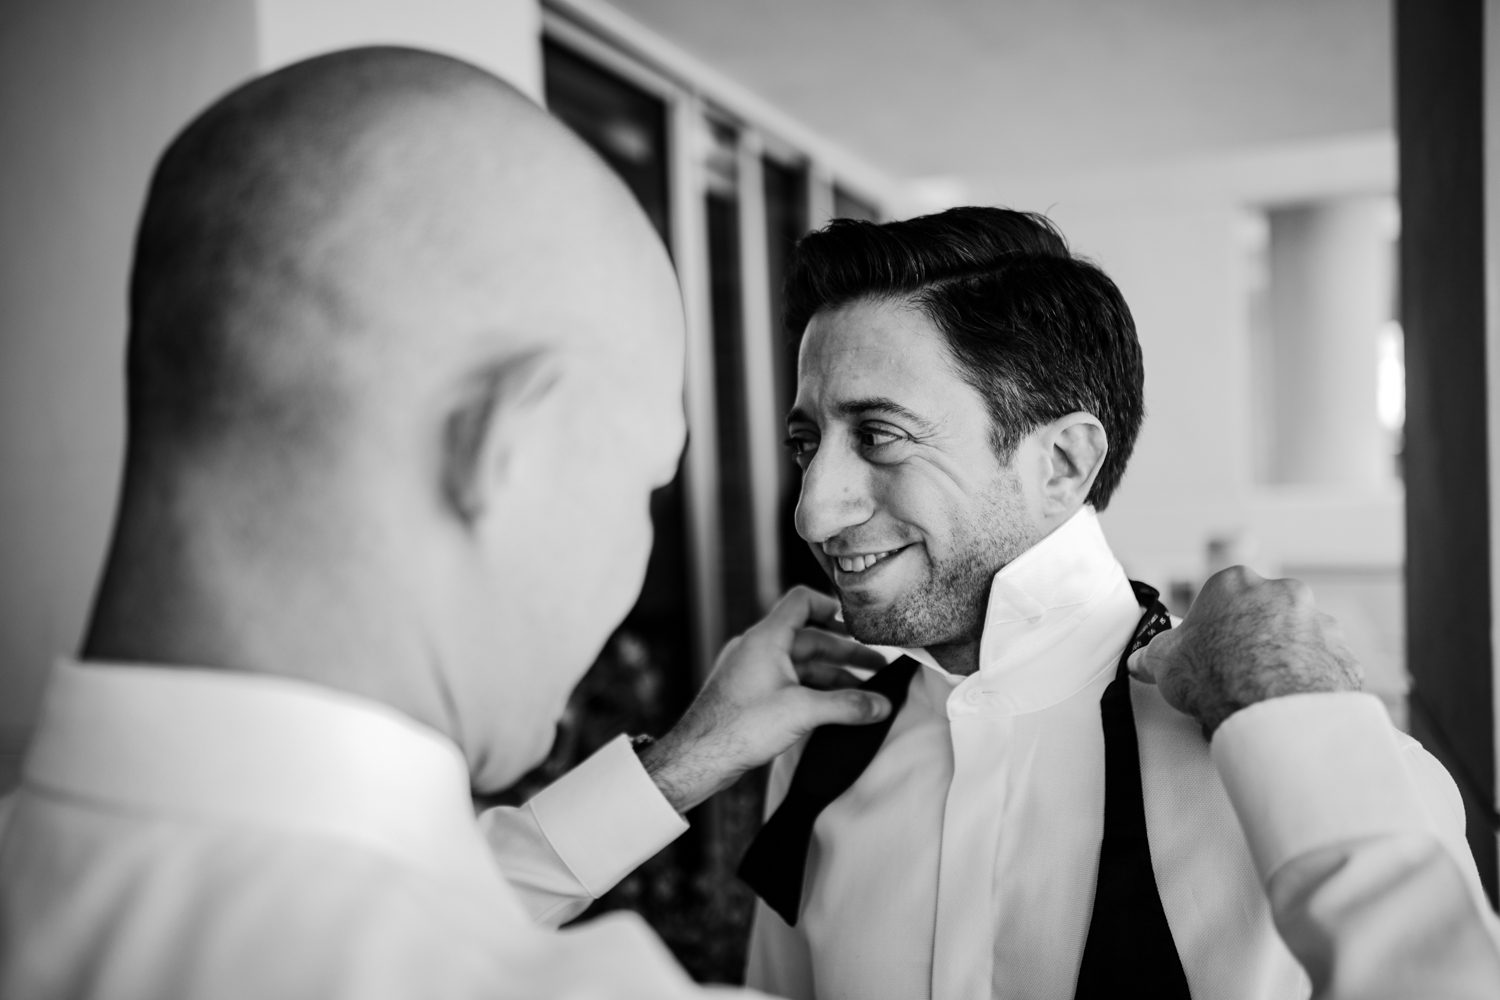 A man is tying his tie in a black and white photo.